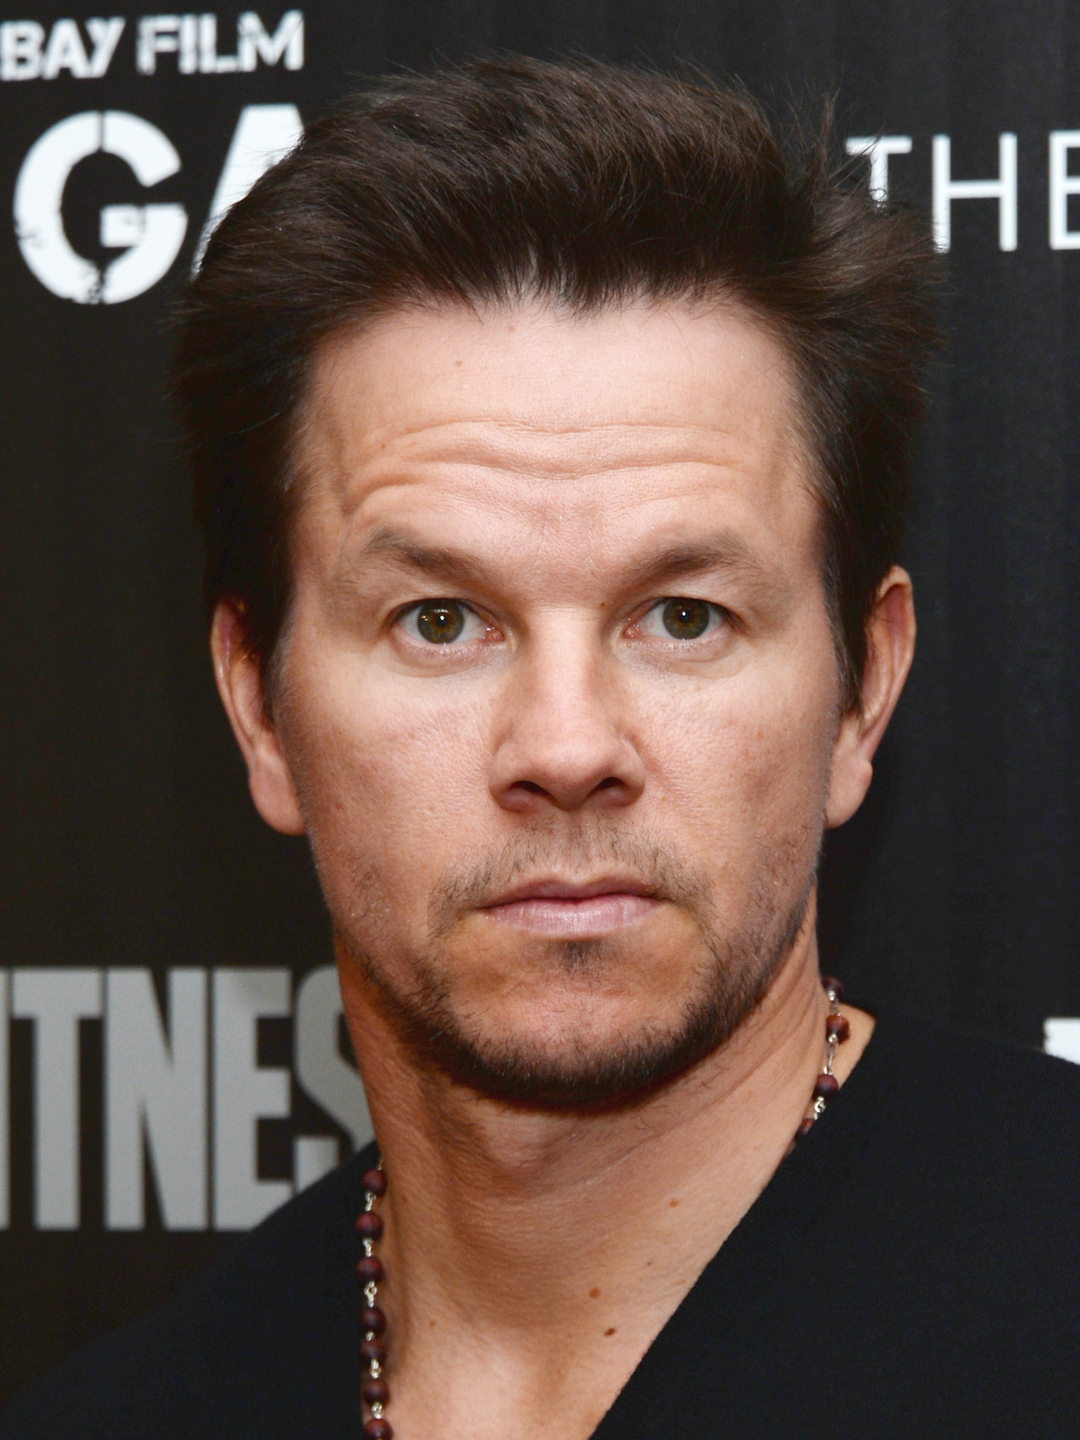 Mark Wahlberg does he have kids